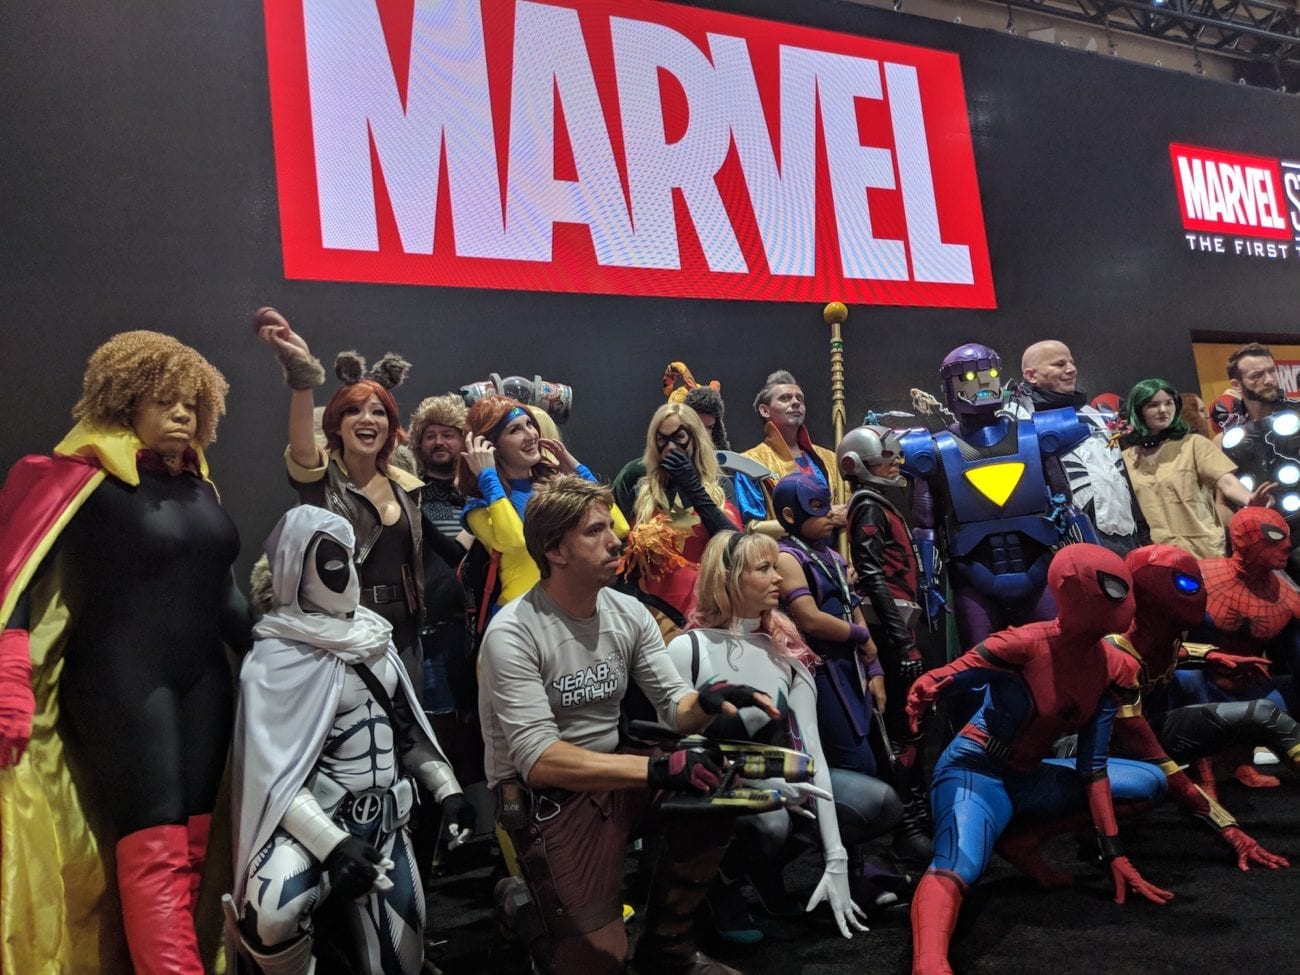 The San Diego Comic-Con is gone for another year, but we’re basking in its multi-genre glory. Our trip to the event as an SDCC cosplayer was memorable.